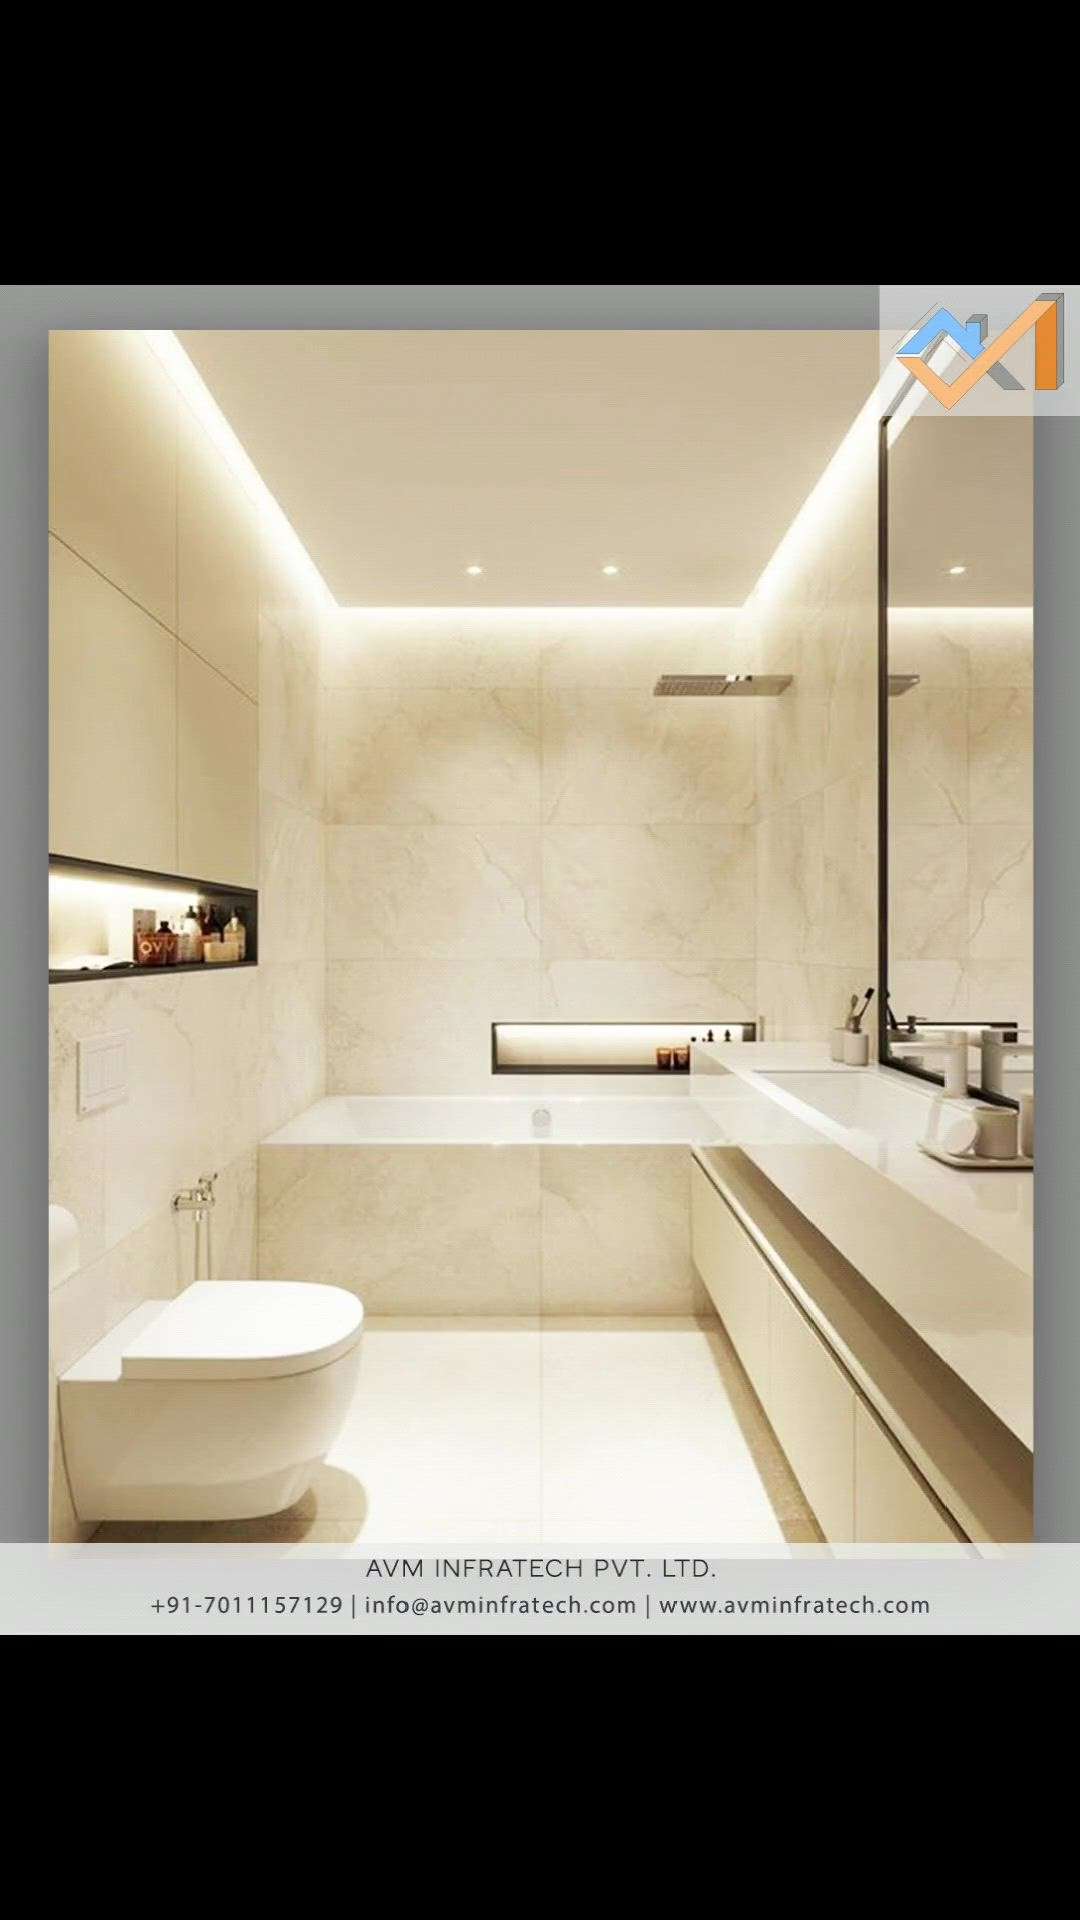 Creating the right ambience is key for a bathroom especially, because while we use it every day it's the place that at times we need to feel completely indulgent – run a bath and shut the world out kind of vibes.


Follow us for more such amazing updates. 
.
.
#bathroom #bathroomdesign #bathroomdecor #bathroomtiles #bathroomremodel #bathroomrenovation #bathroominspiration #bathroomideas #bathroomgoals #bathroominspo #bathroomstyle #bathroomselfie #bathroomstyling #bathroomdetails #bathroomreno #bathroomdesigns #bathroomvanity #bathroominterior #avminfratech